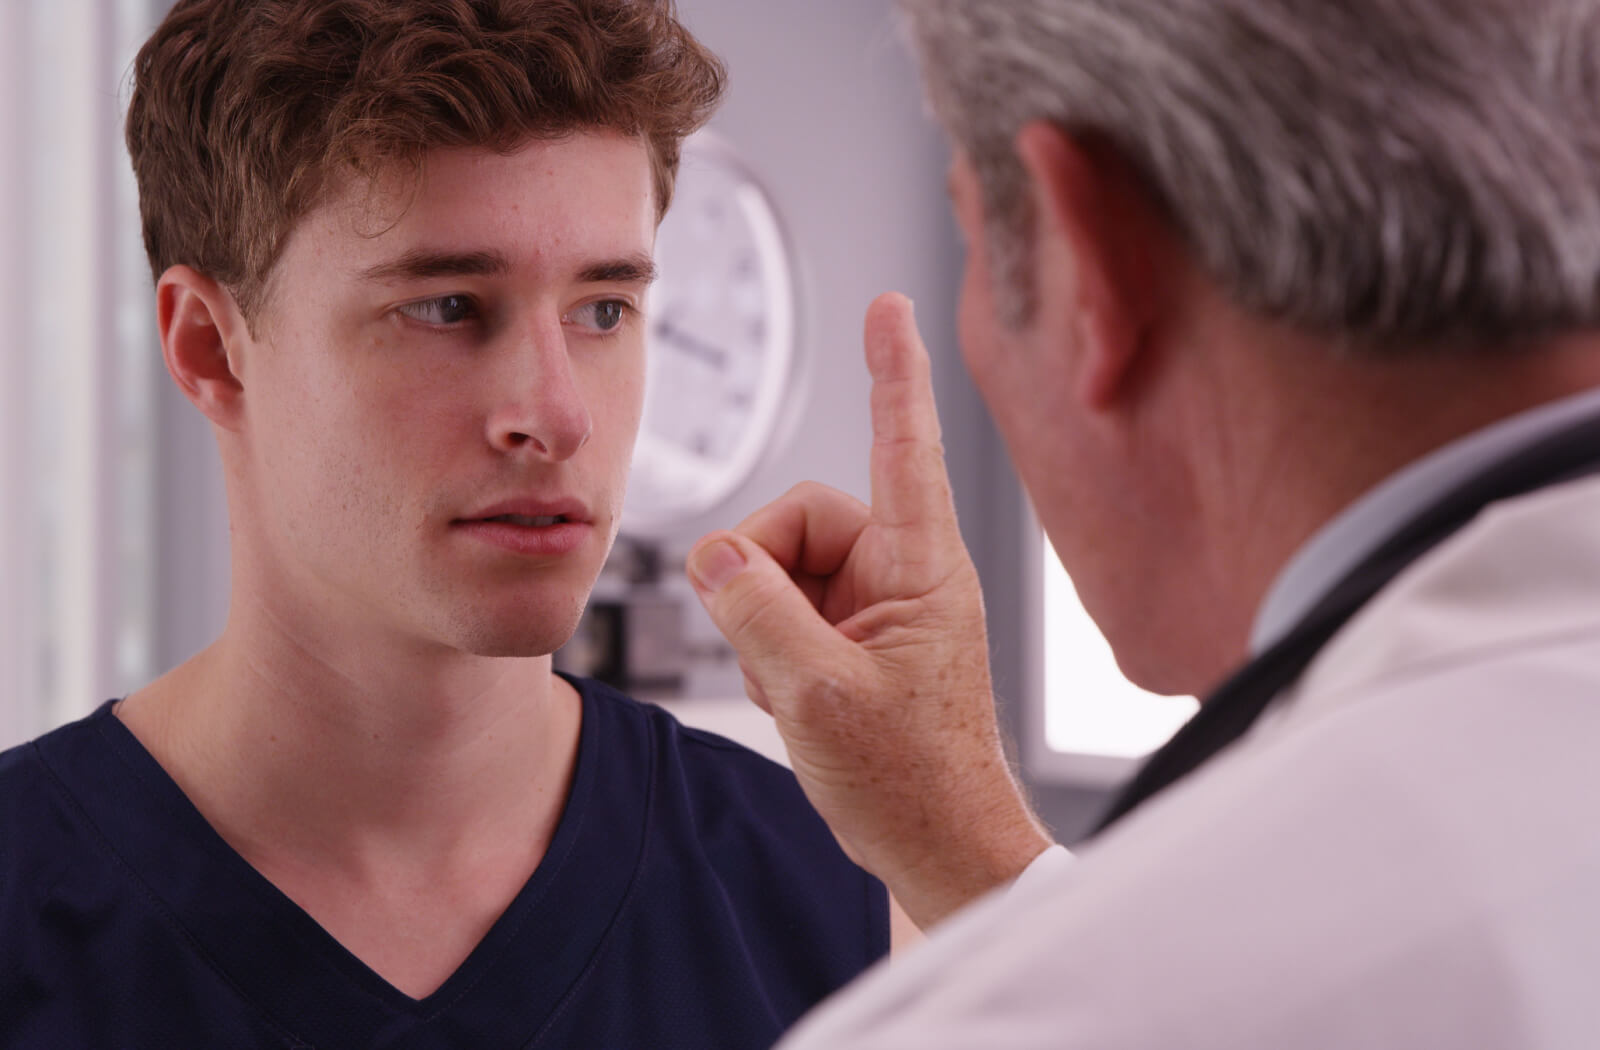 A young man looking at his doctor's finger during an eye-tracking exercise